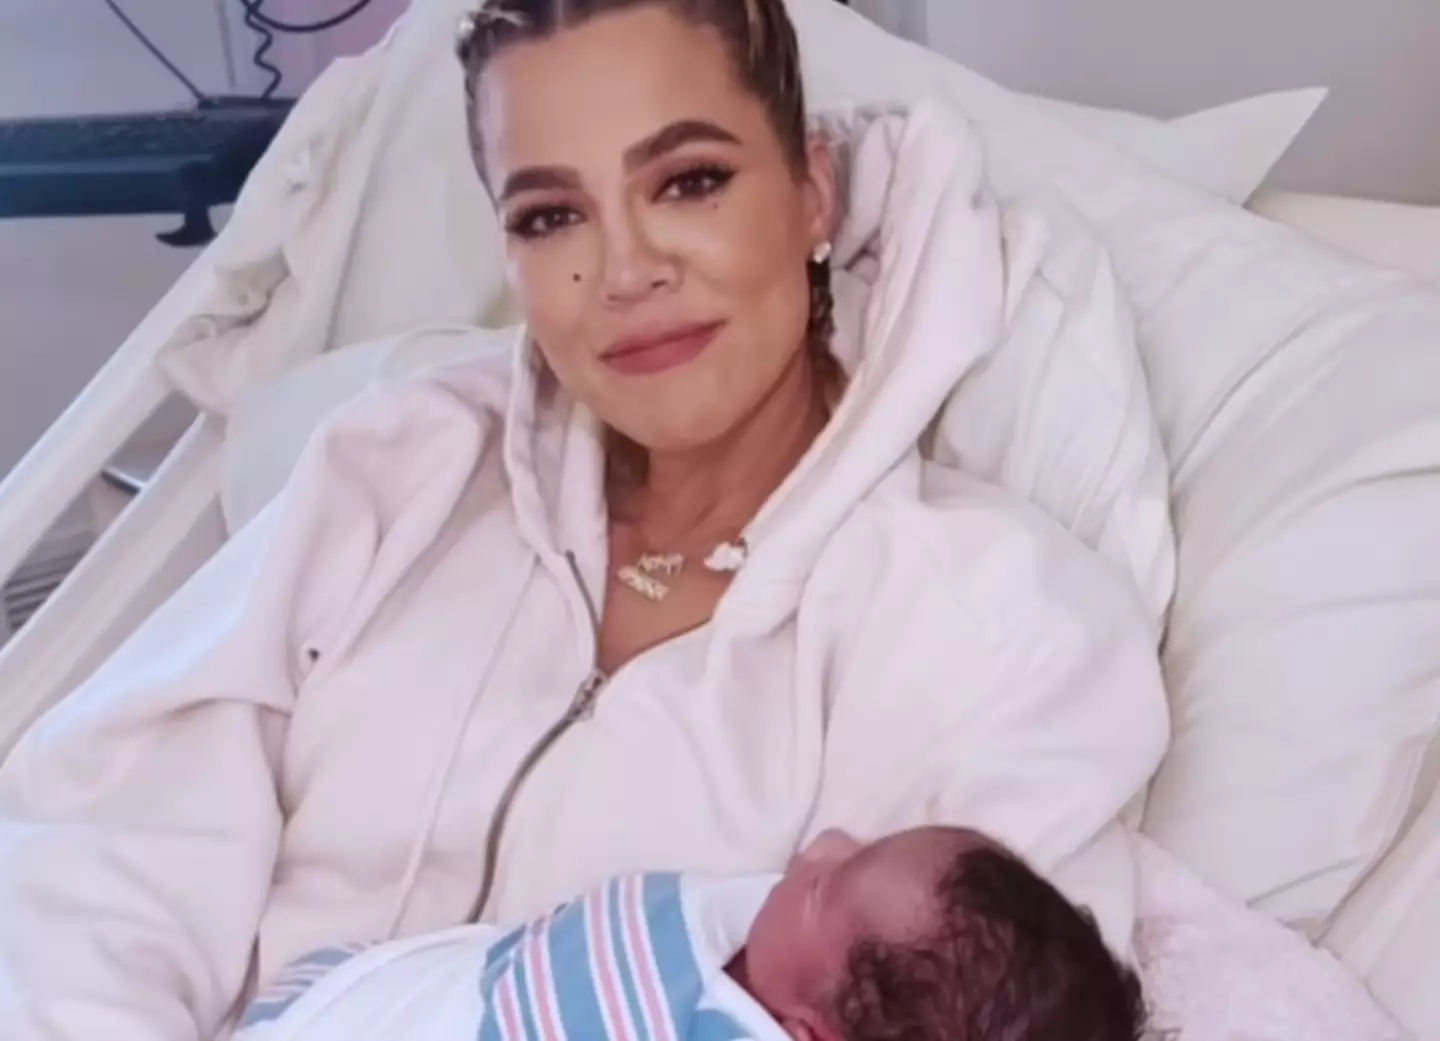 Khloé allowed Tristan to visit in the hospital.